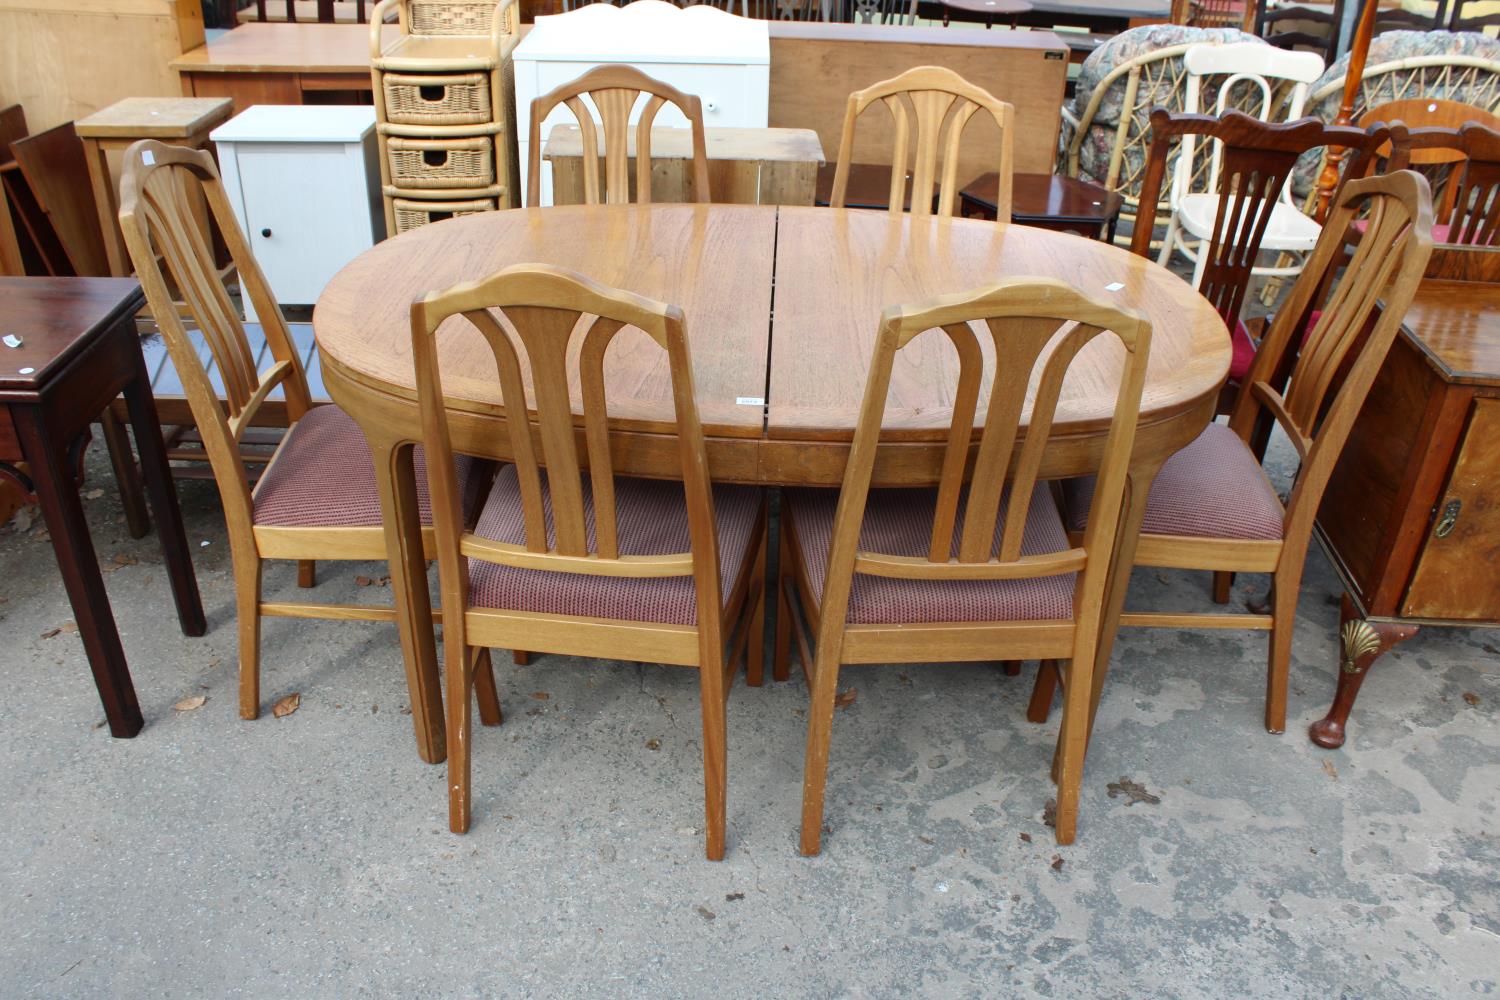 A PARKER KNOLL RETRO TEAK EXTENDING DINING TABLE 60" X 39" (LEAF 21") AND SIX DINING CHAIRS